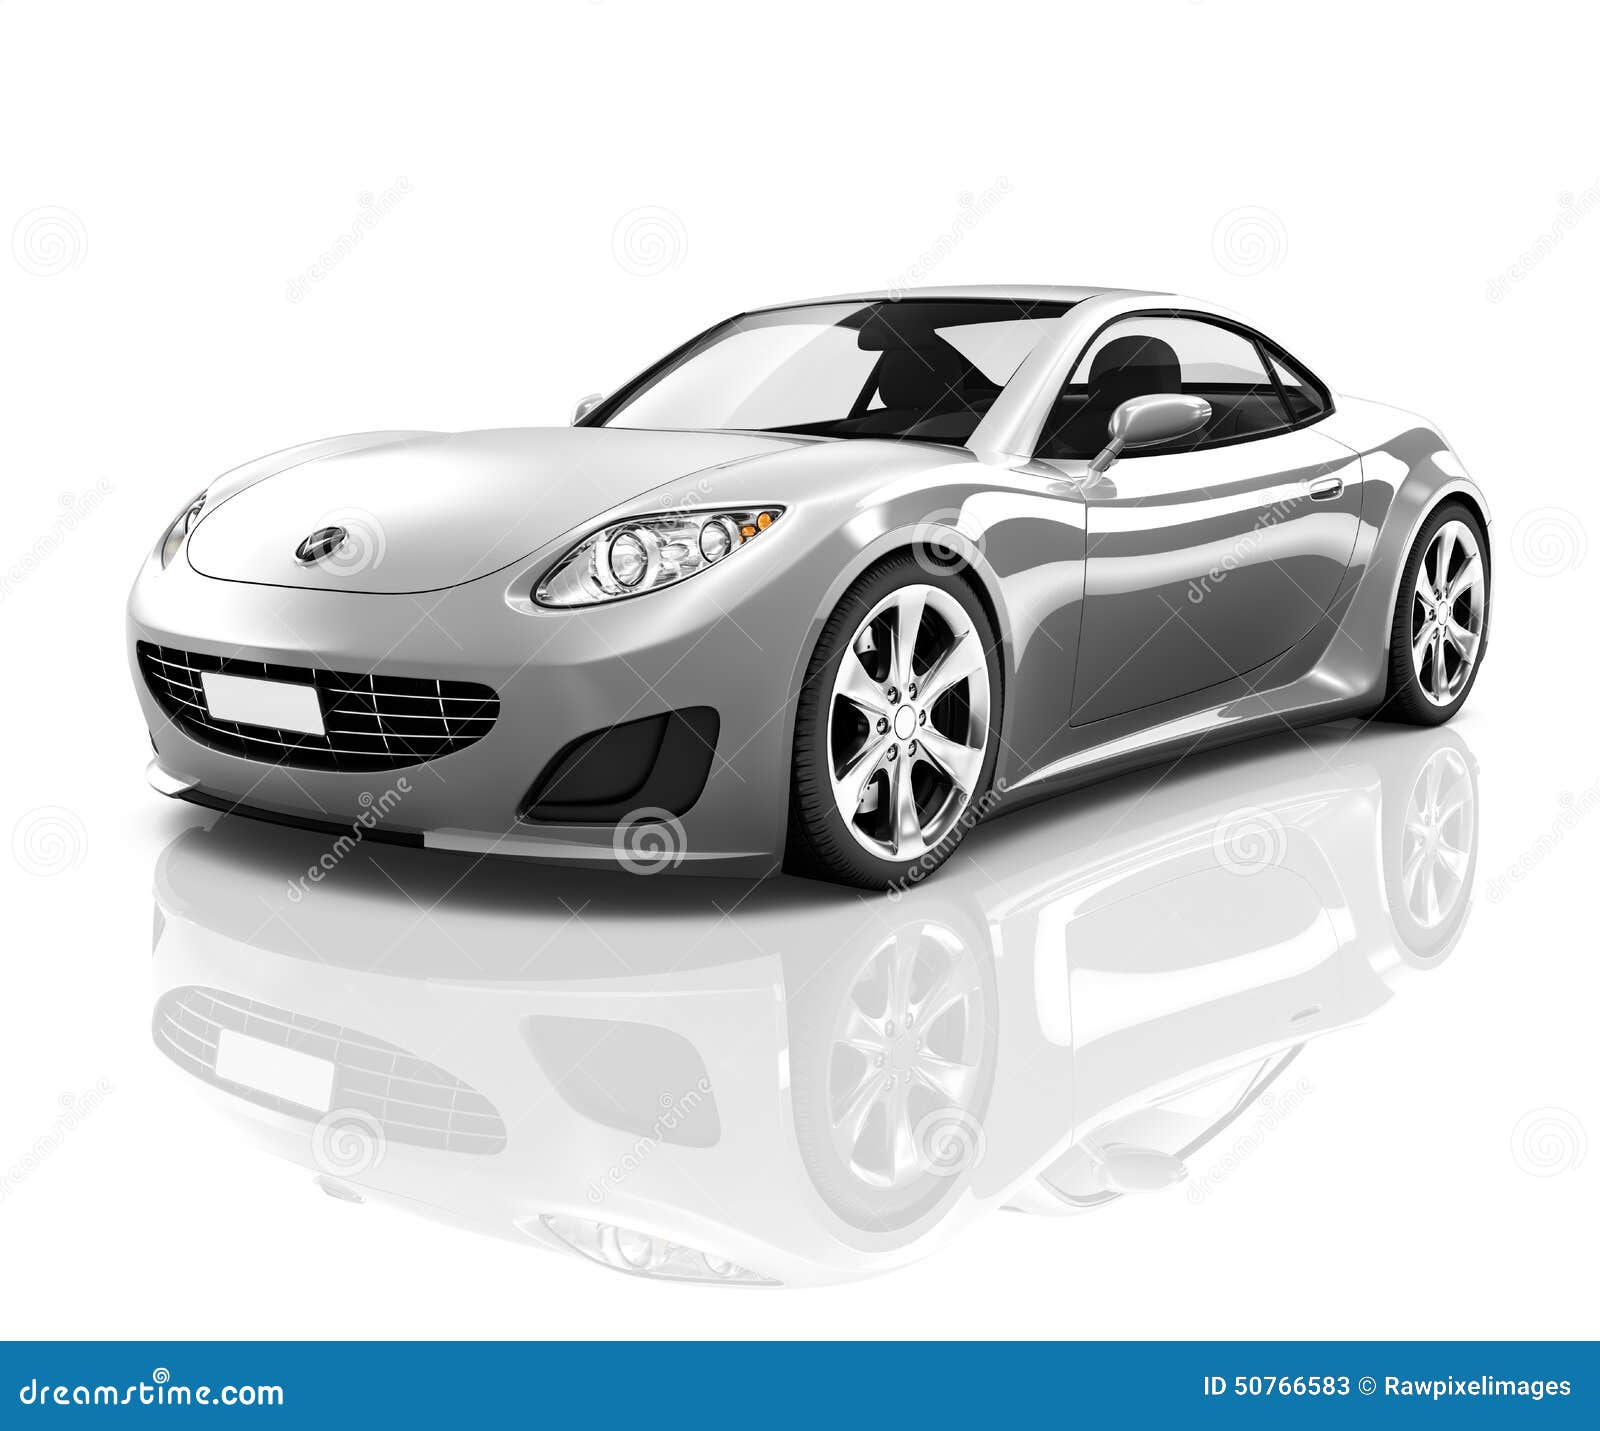 Luxury Silver Sports Car Contemporary Concept Stock Illustration ...